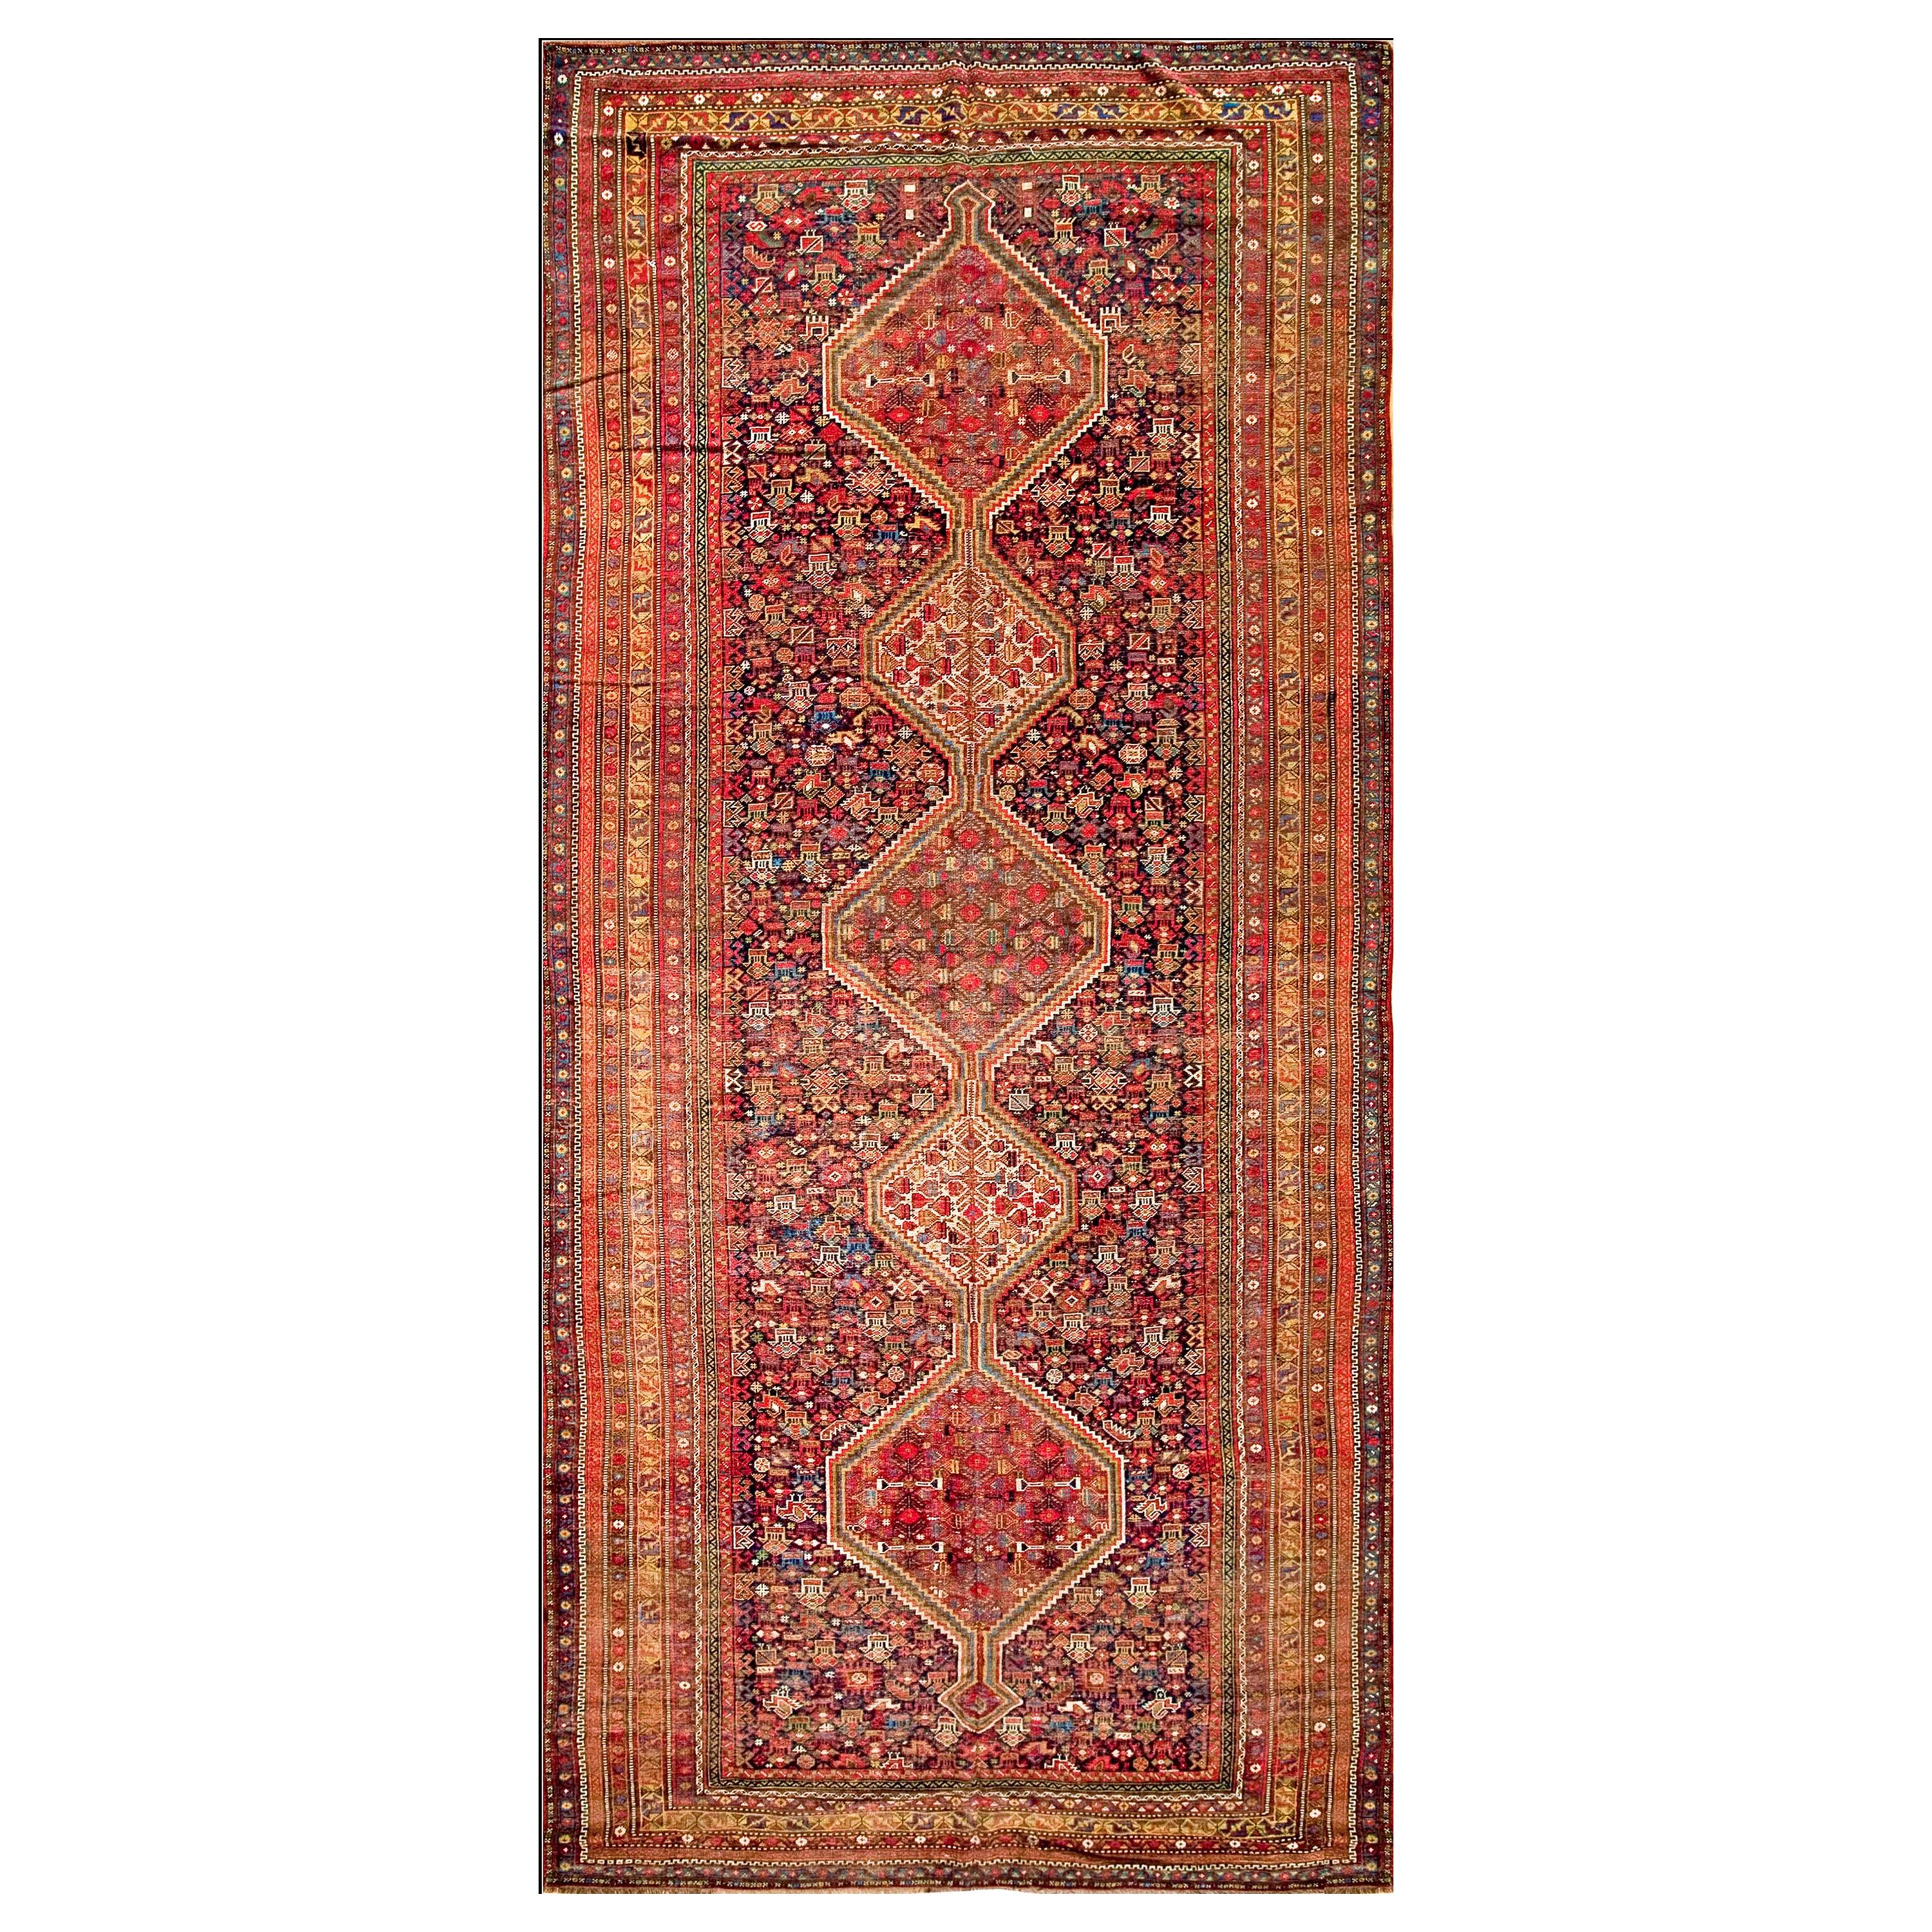 Early 20th Century S Persian Ghashgaie Gallery Carpet (6'6" x 14'4" - 198 x 437)